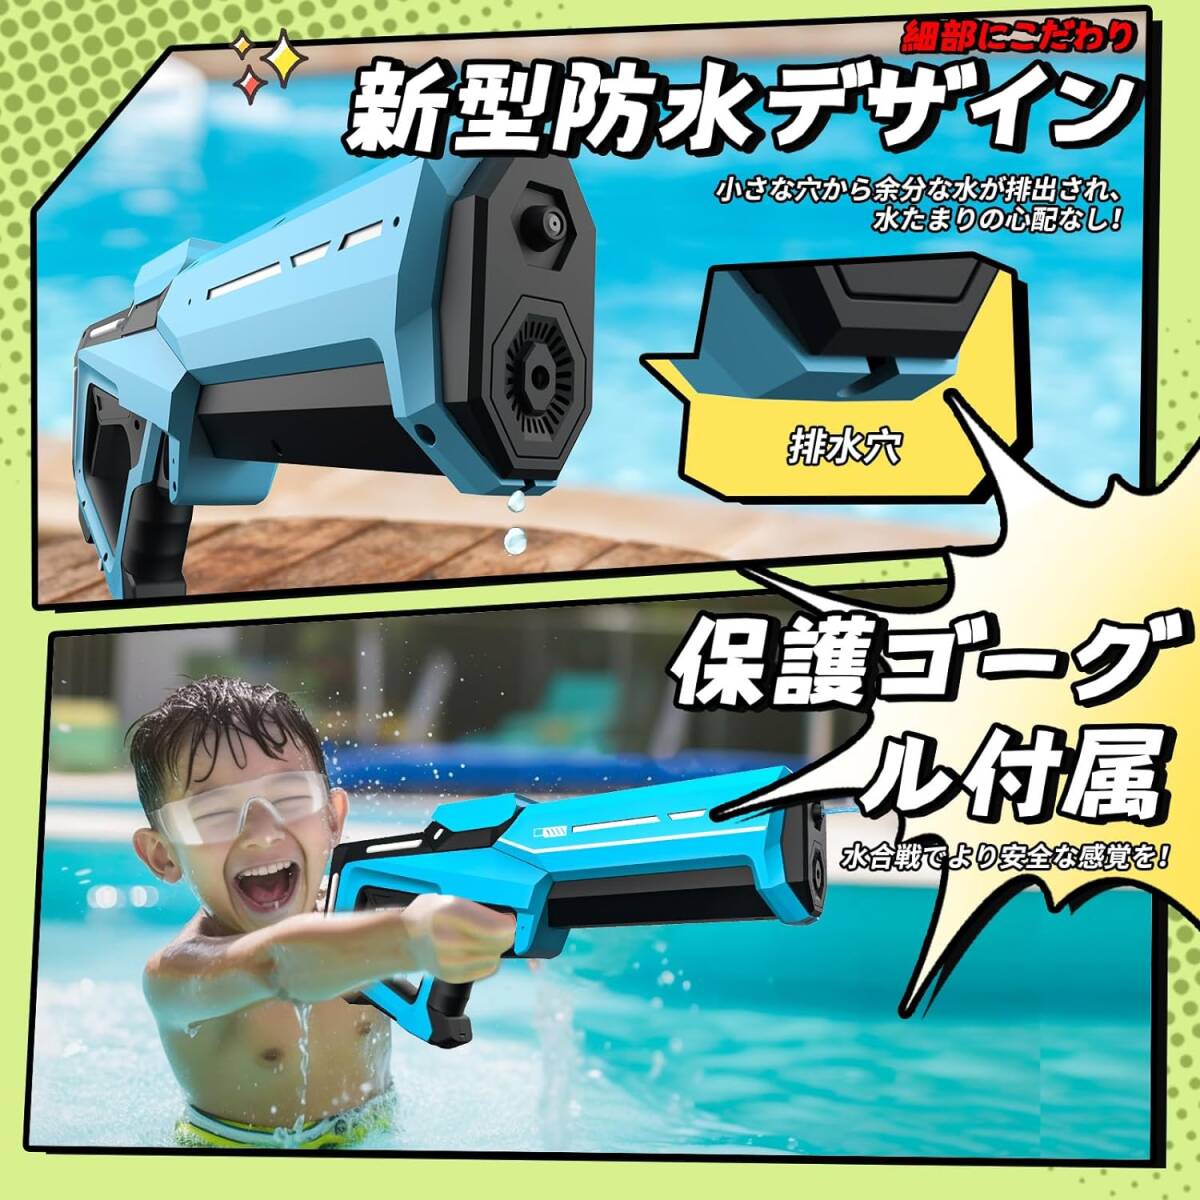  electric water pistol light blue electric water gun powerful motor power eminent high speed ream .180 departure 330ml high capacity whole body waterproof specification powerful . distance protection glasses family pool 